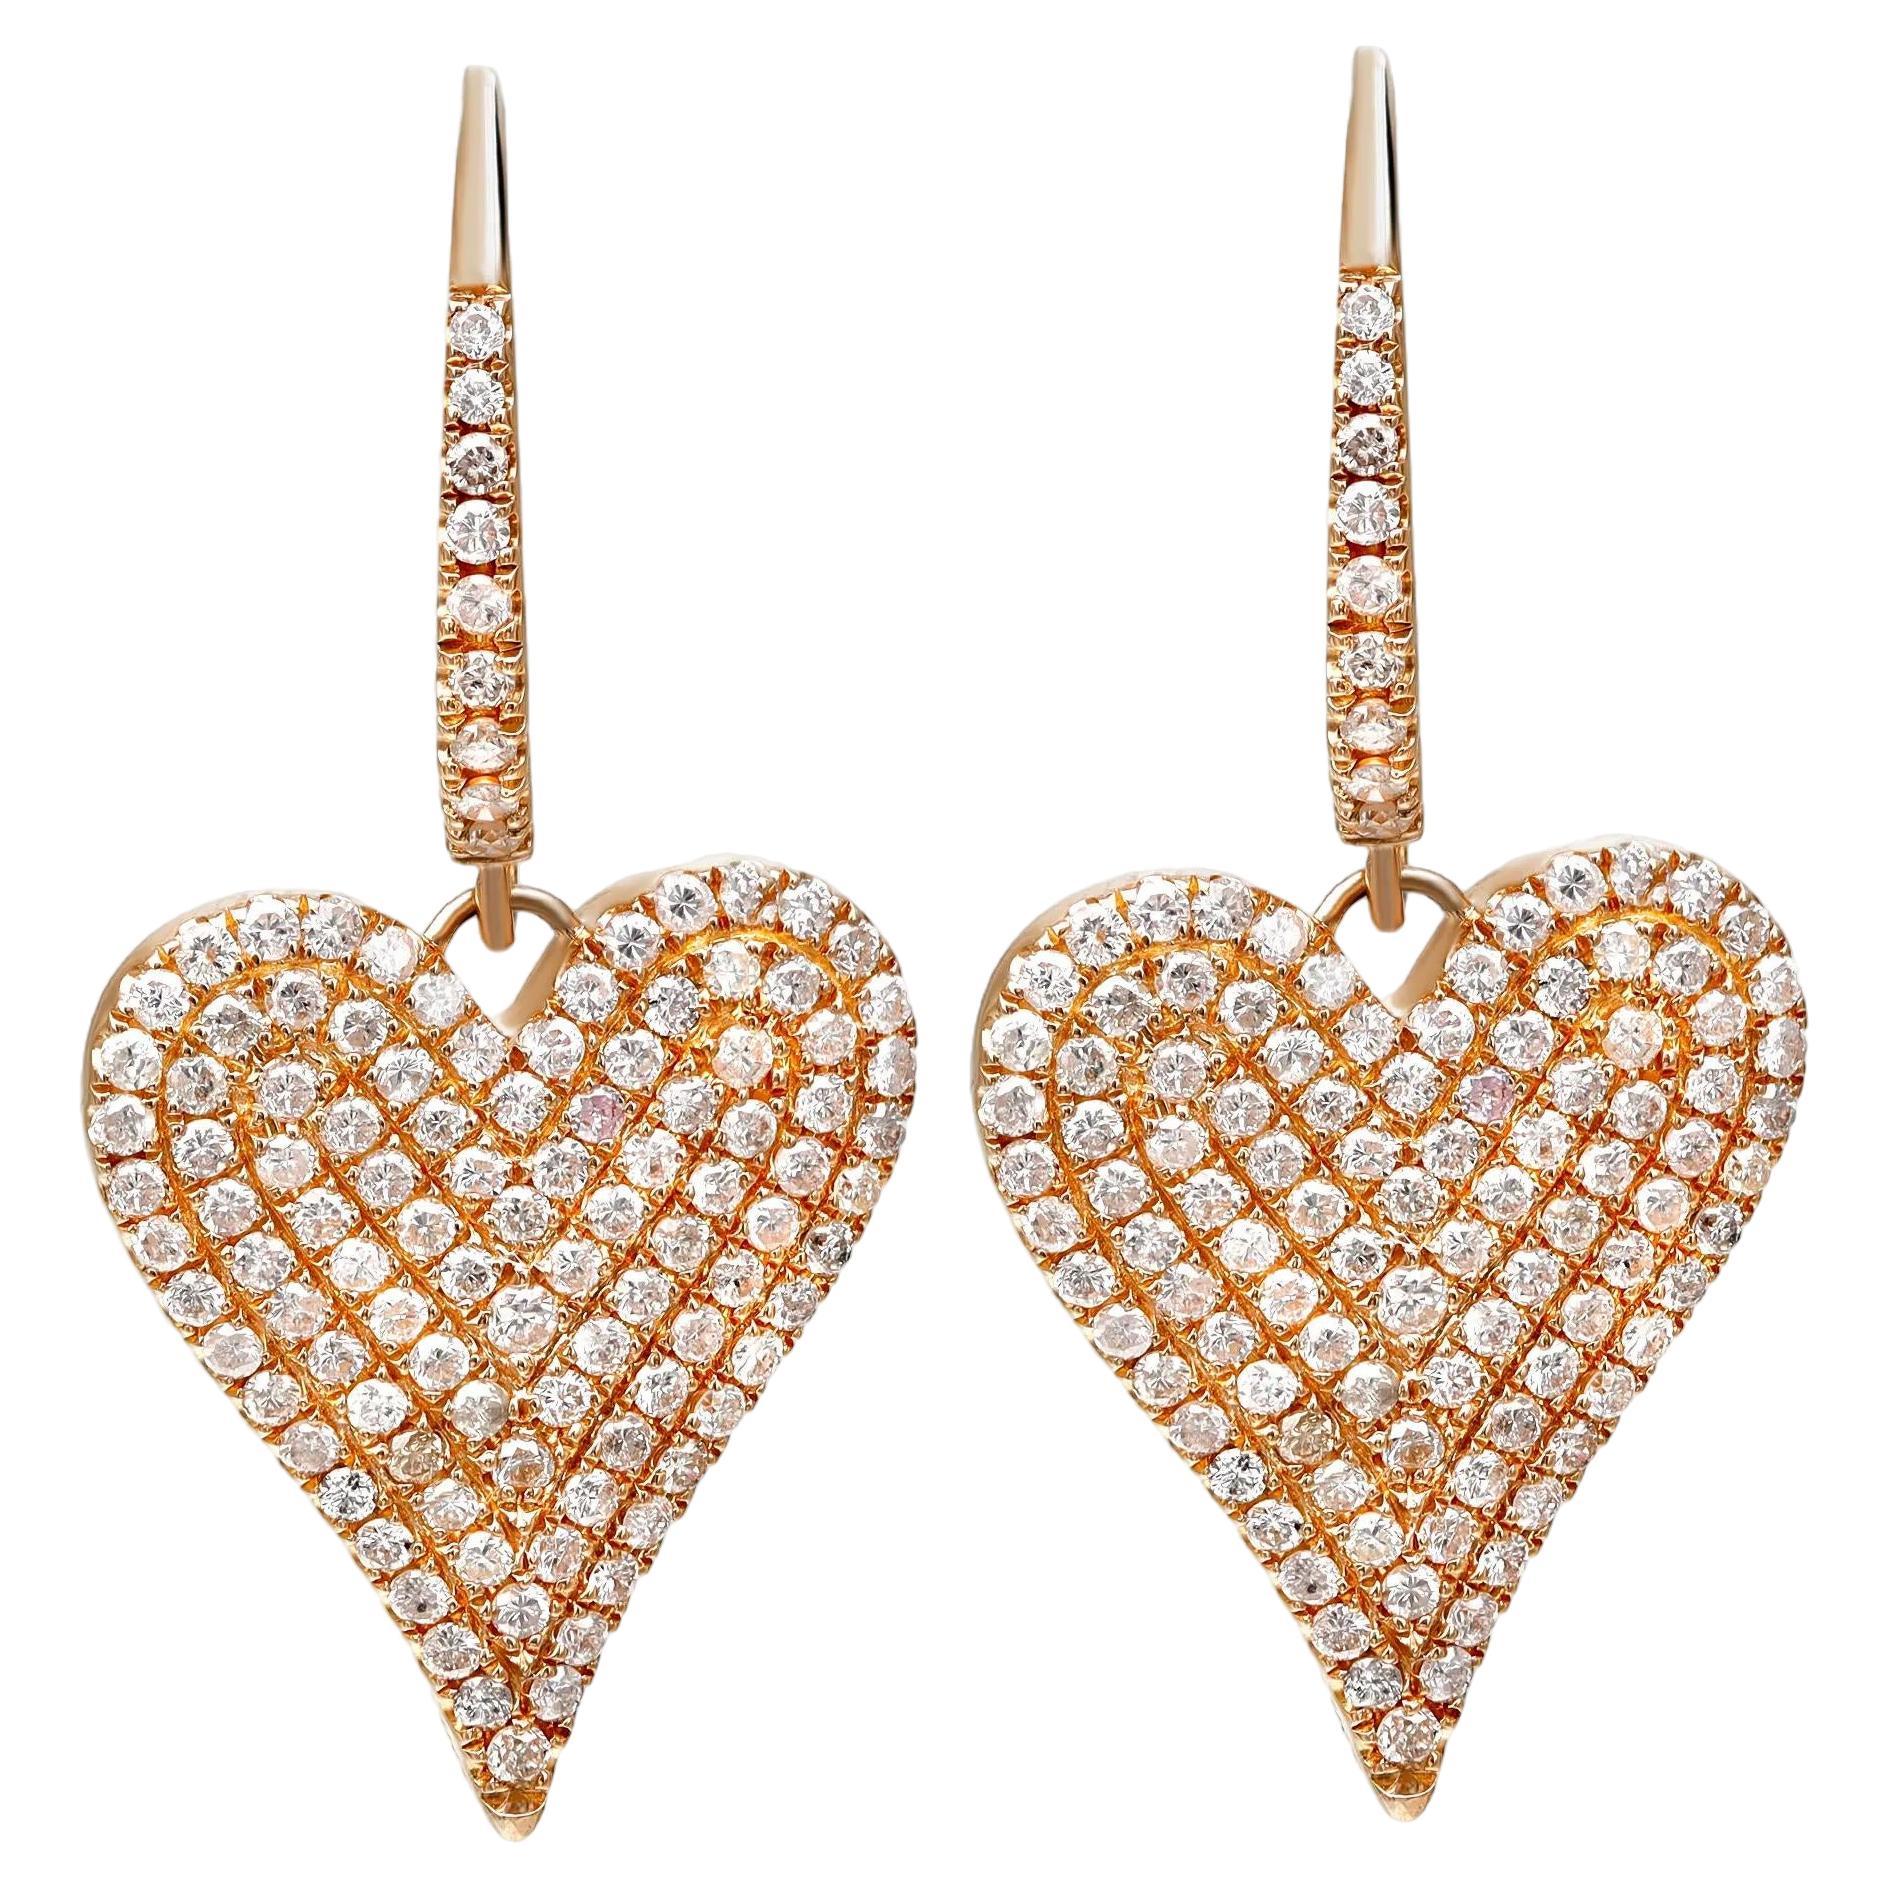 Pave Round Cut Diamond Heart Drop Earrings 14K Yellow Gold 2.00Cttw For Sale